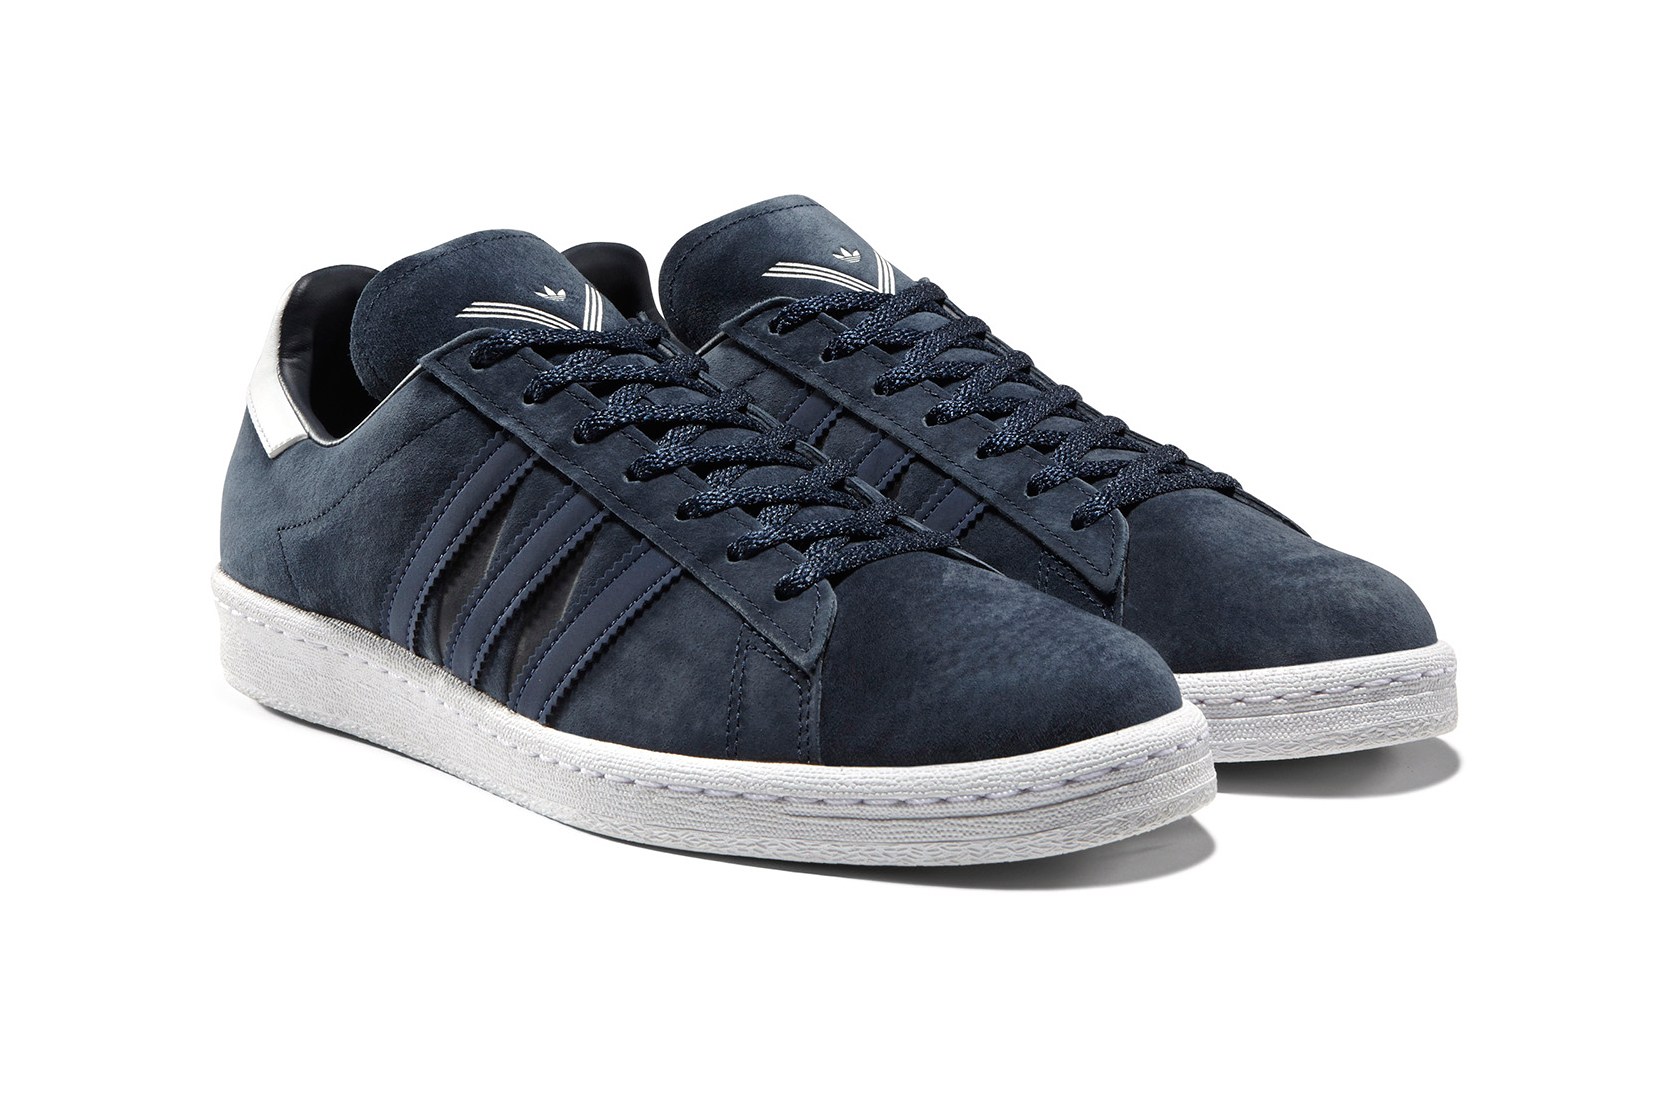 White Mountaineering x Adidas Spring Collection 2